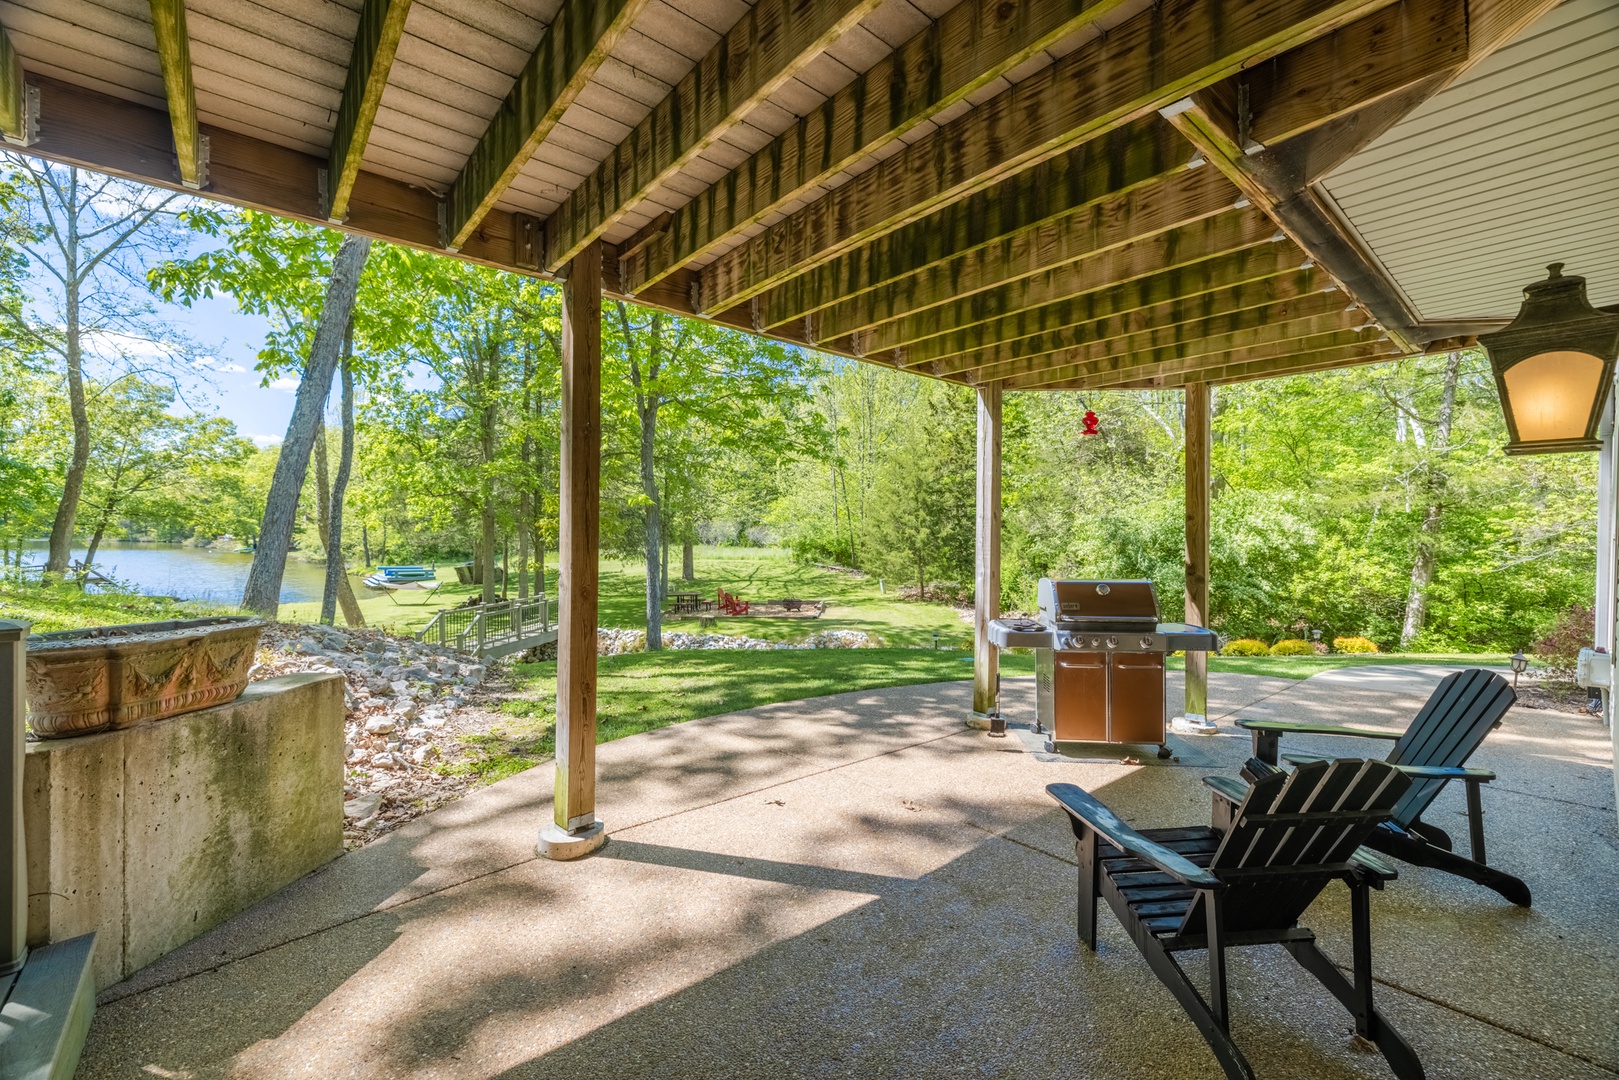 The covered lower patio is perfect for grilling and enjoying the outdoors in any weather